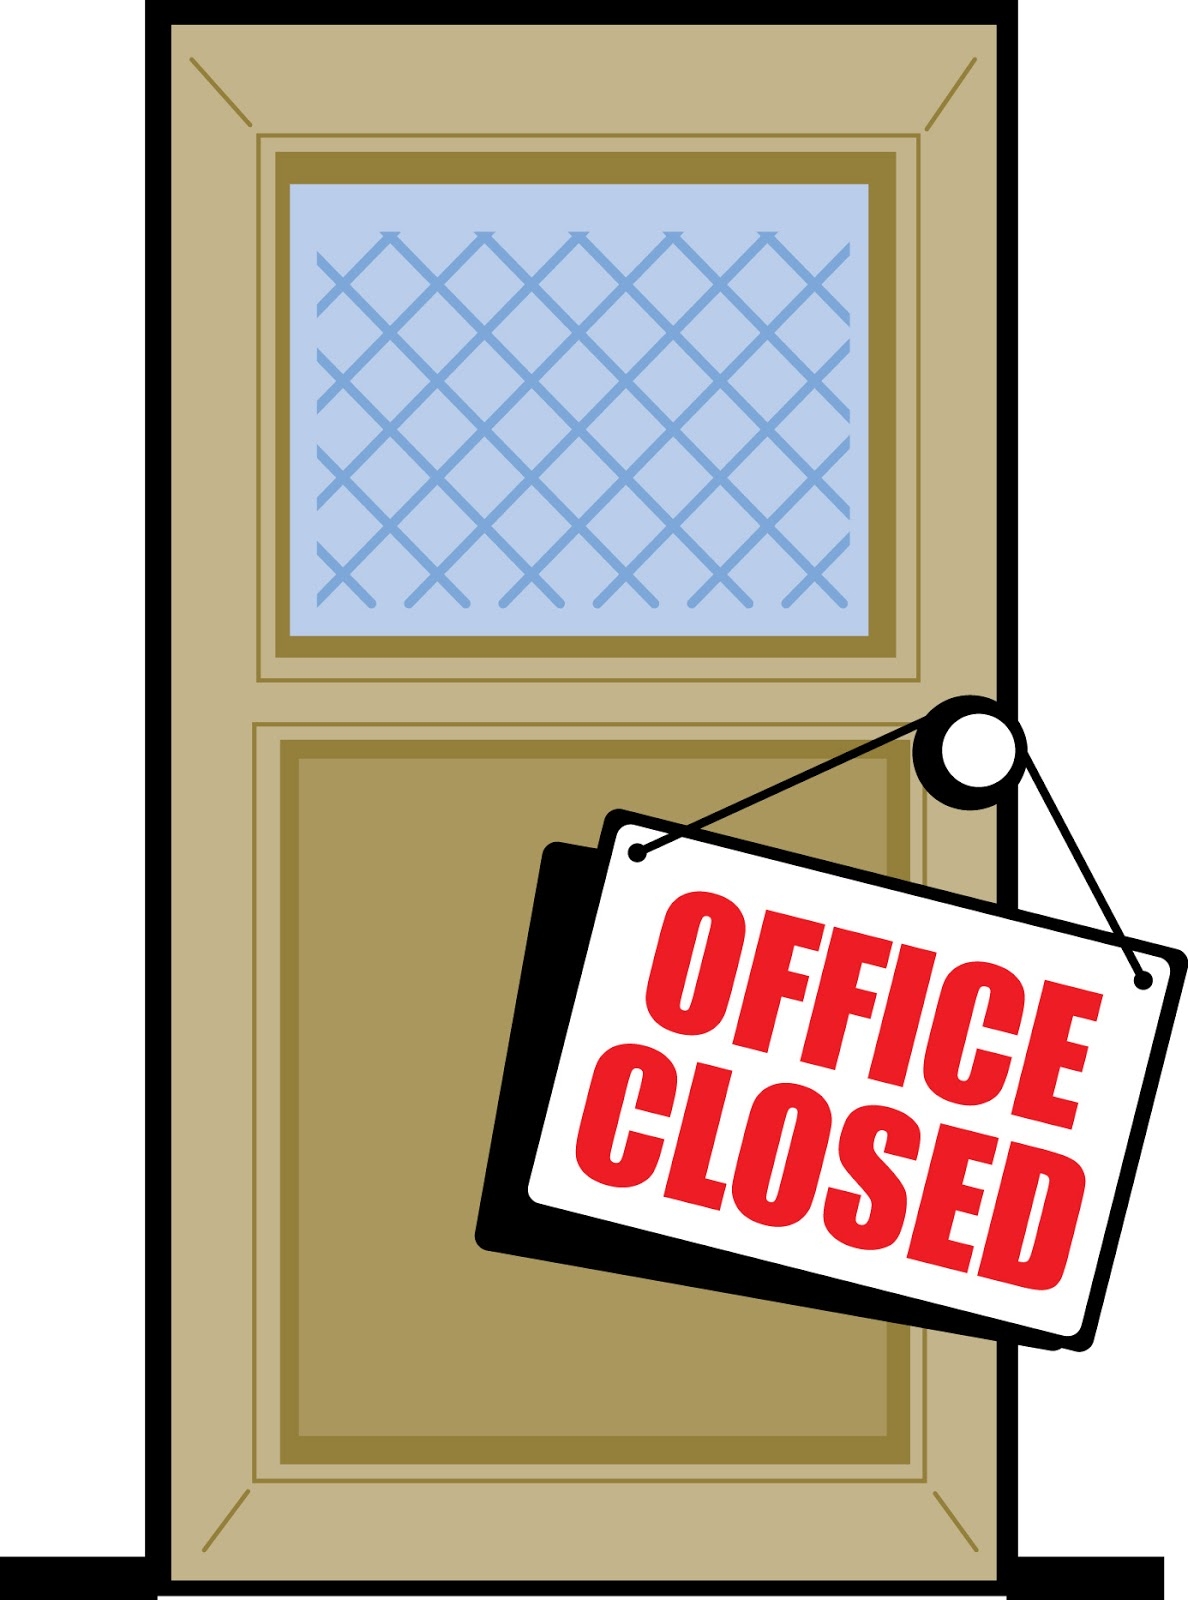 Office closed clip art clipart collection